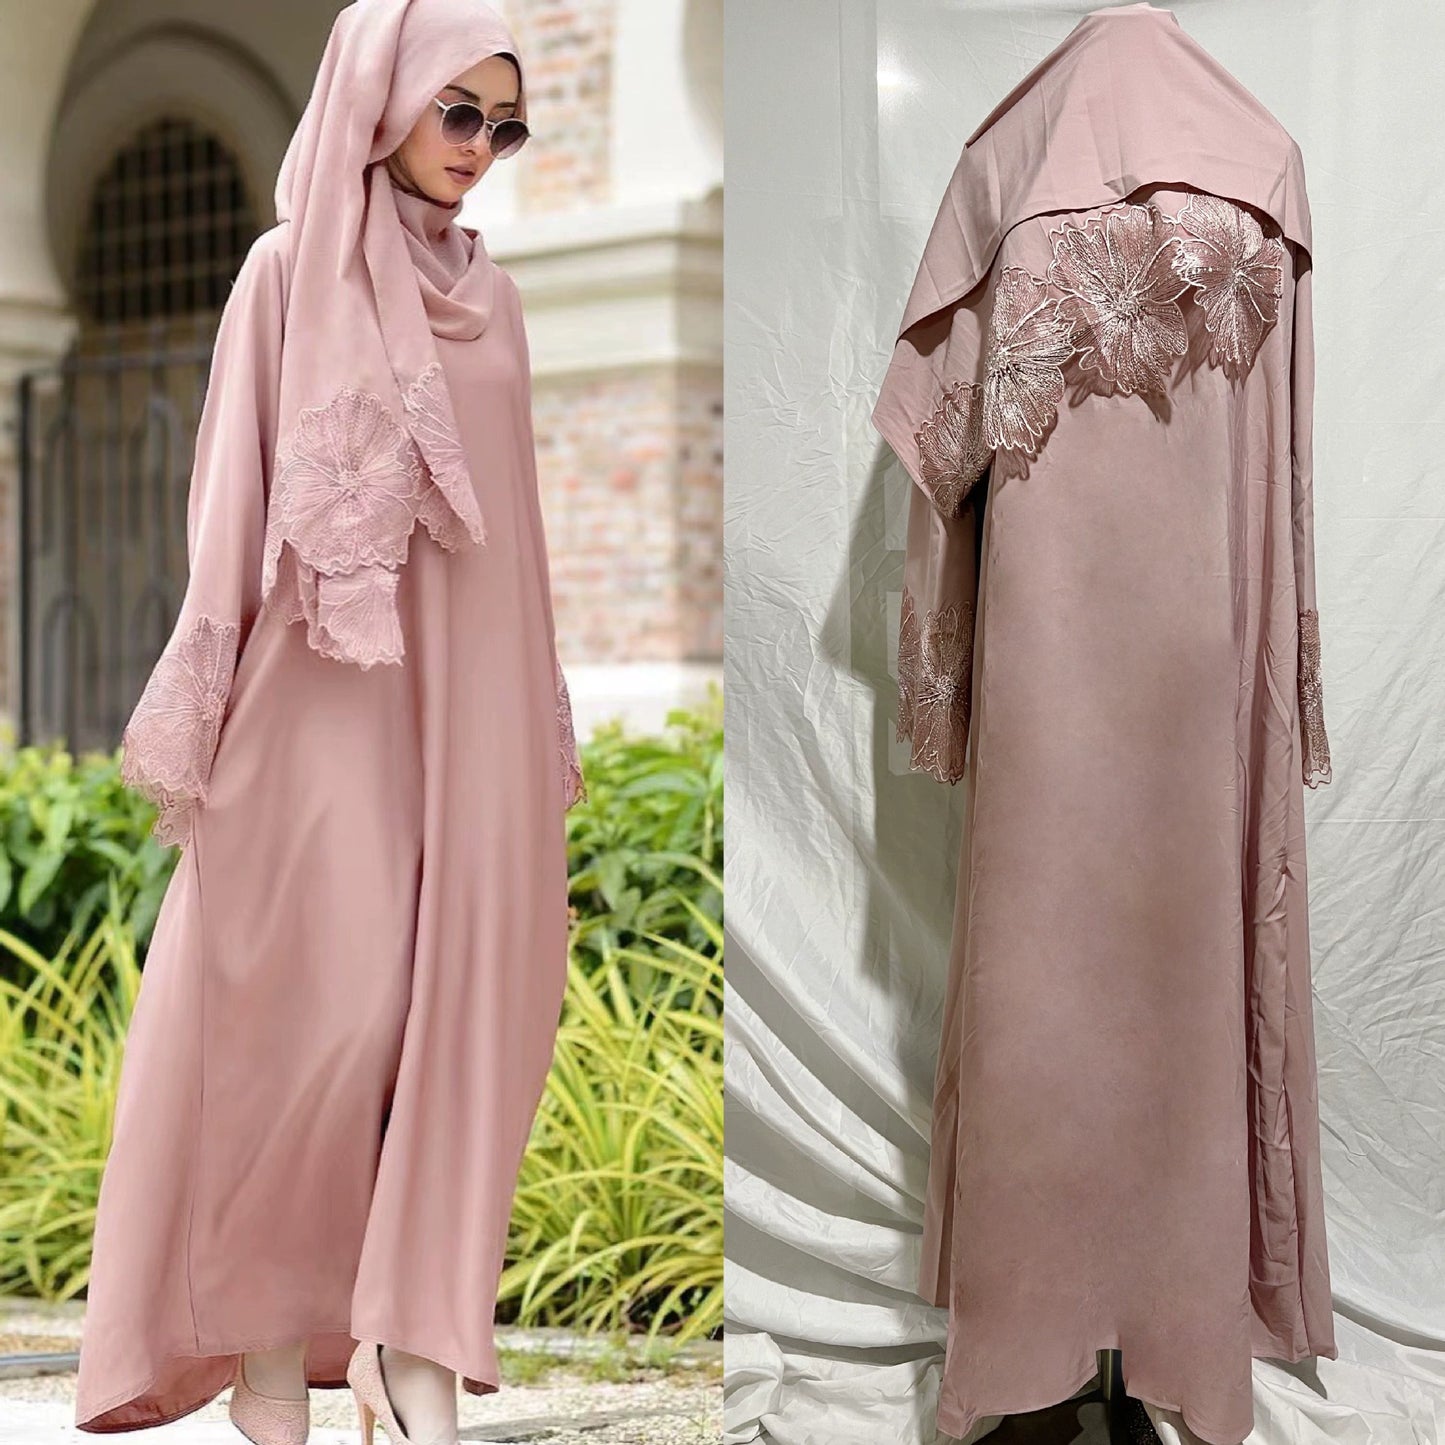 Abaya with embroidery details on edging + Scarf (Shipping not included)